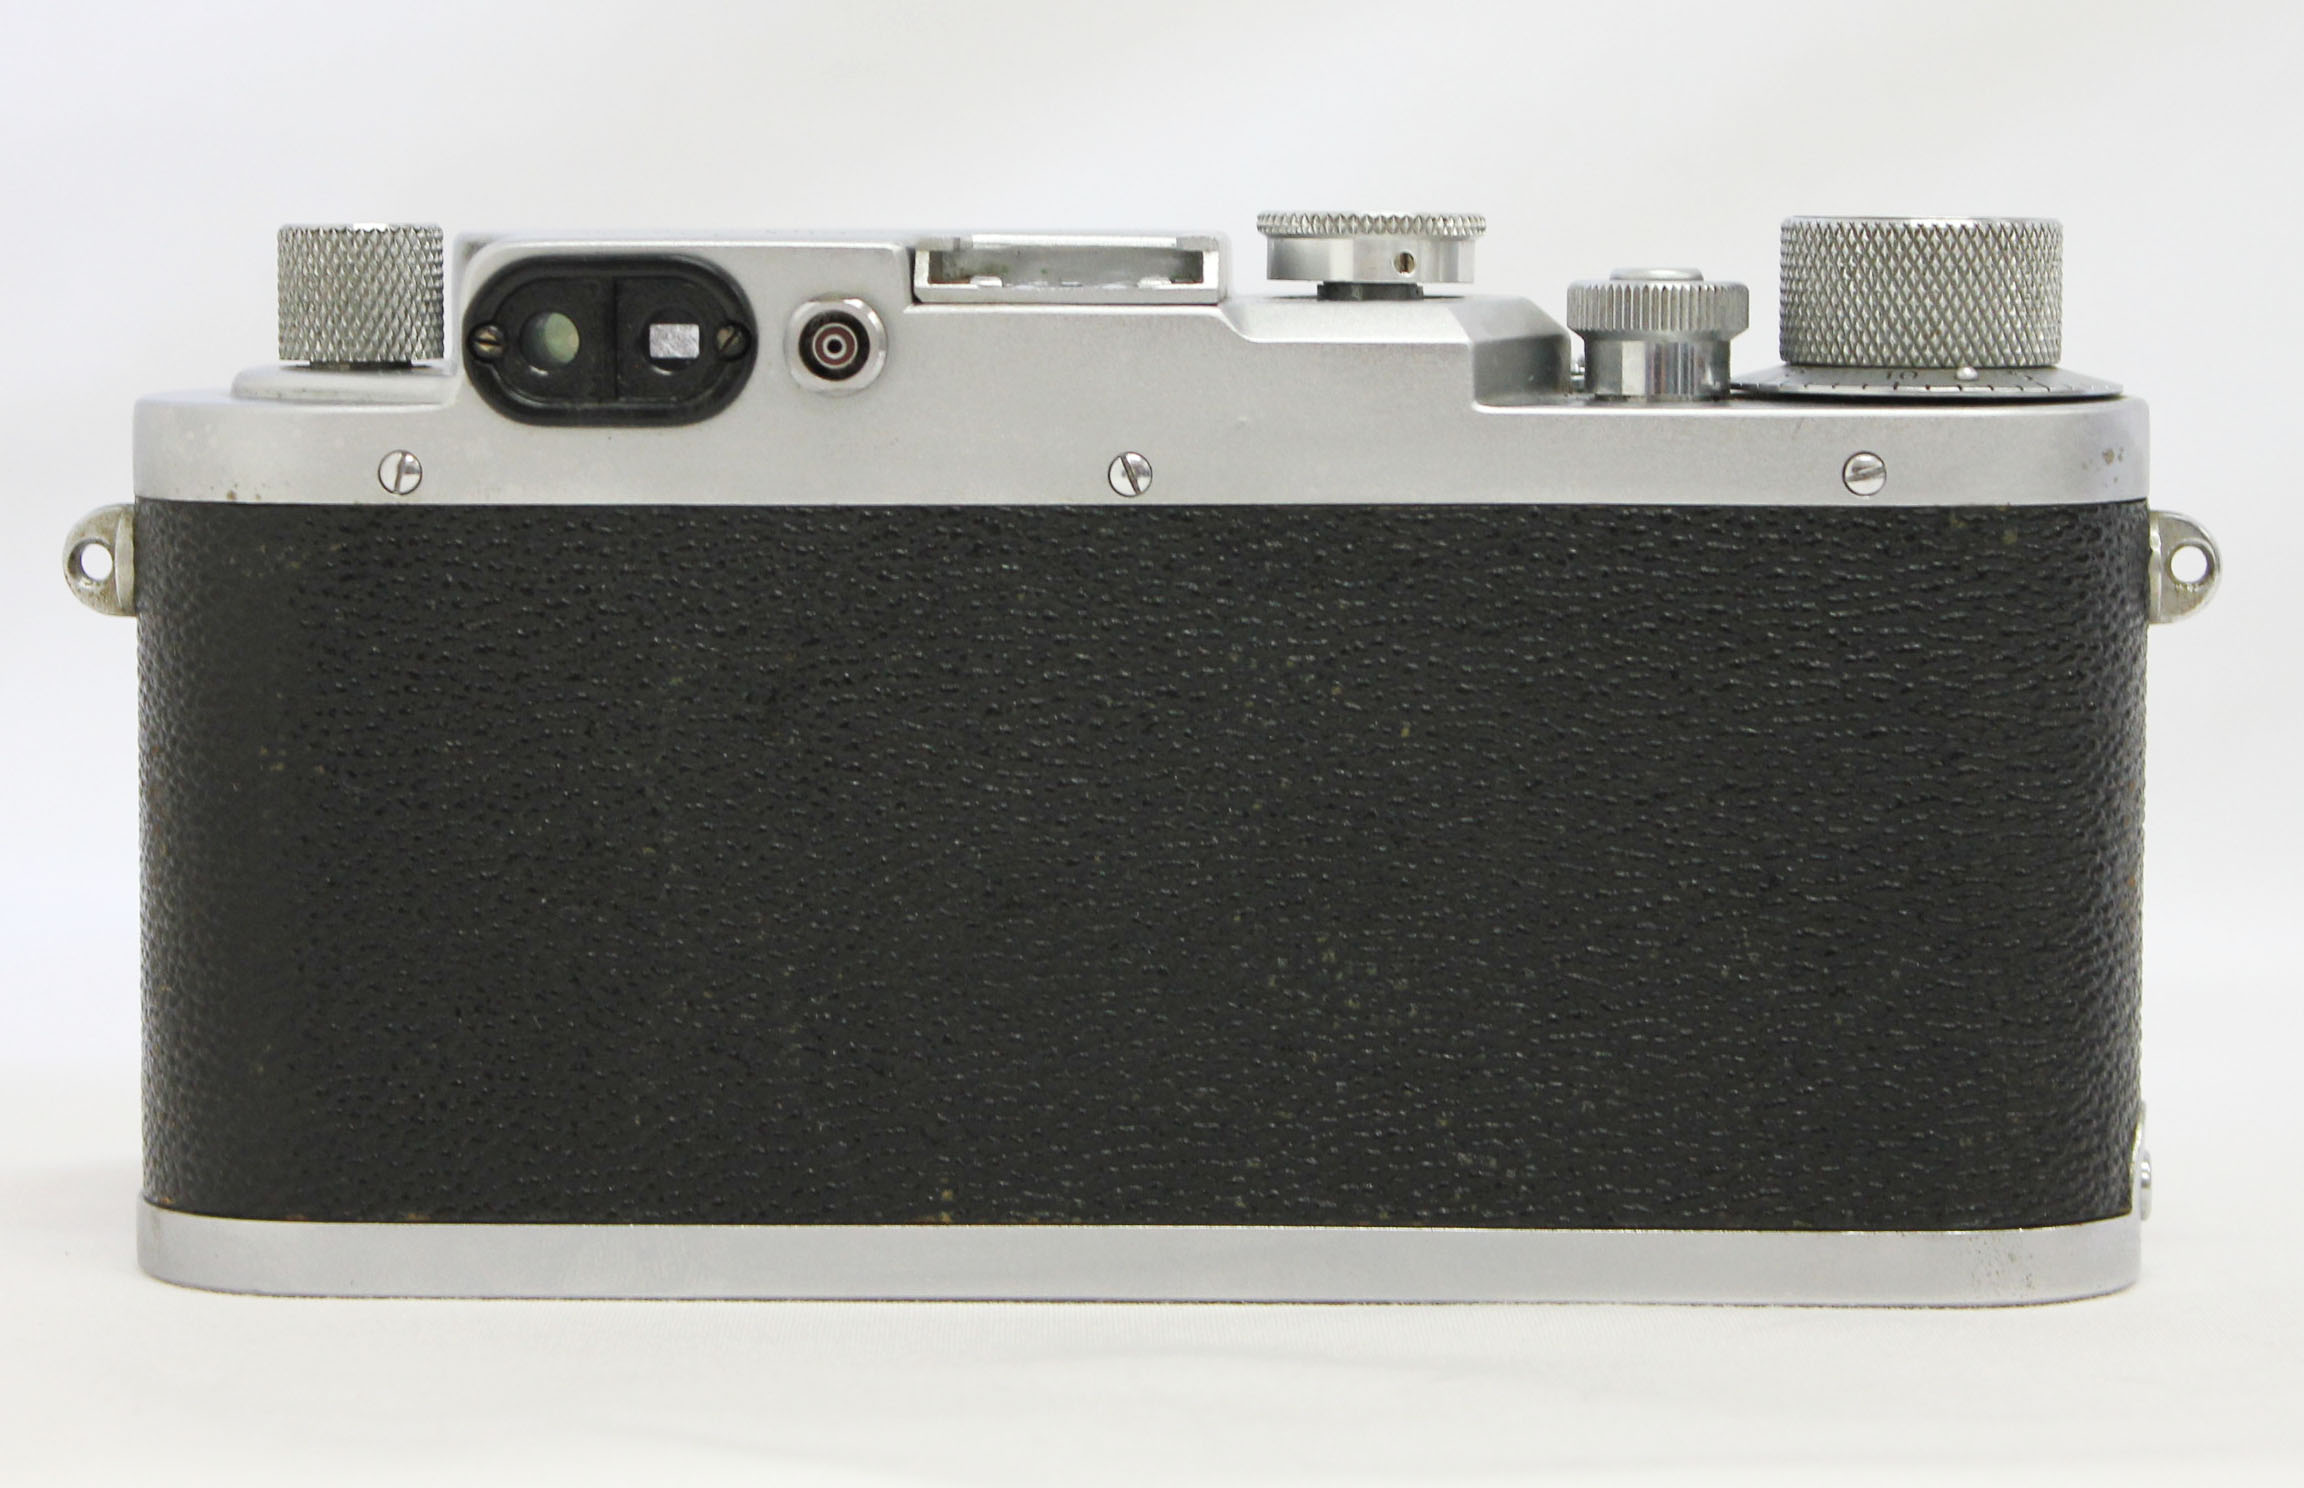 Leotax F Leica Screw Mount LTM M39 Rangefinder Camera with 50mm F/3.5 Lens from Japan Photo 7